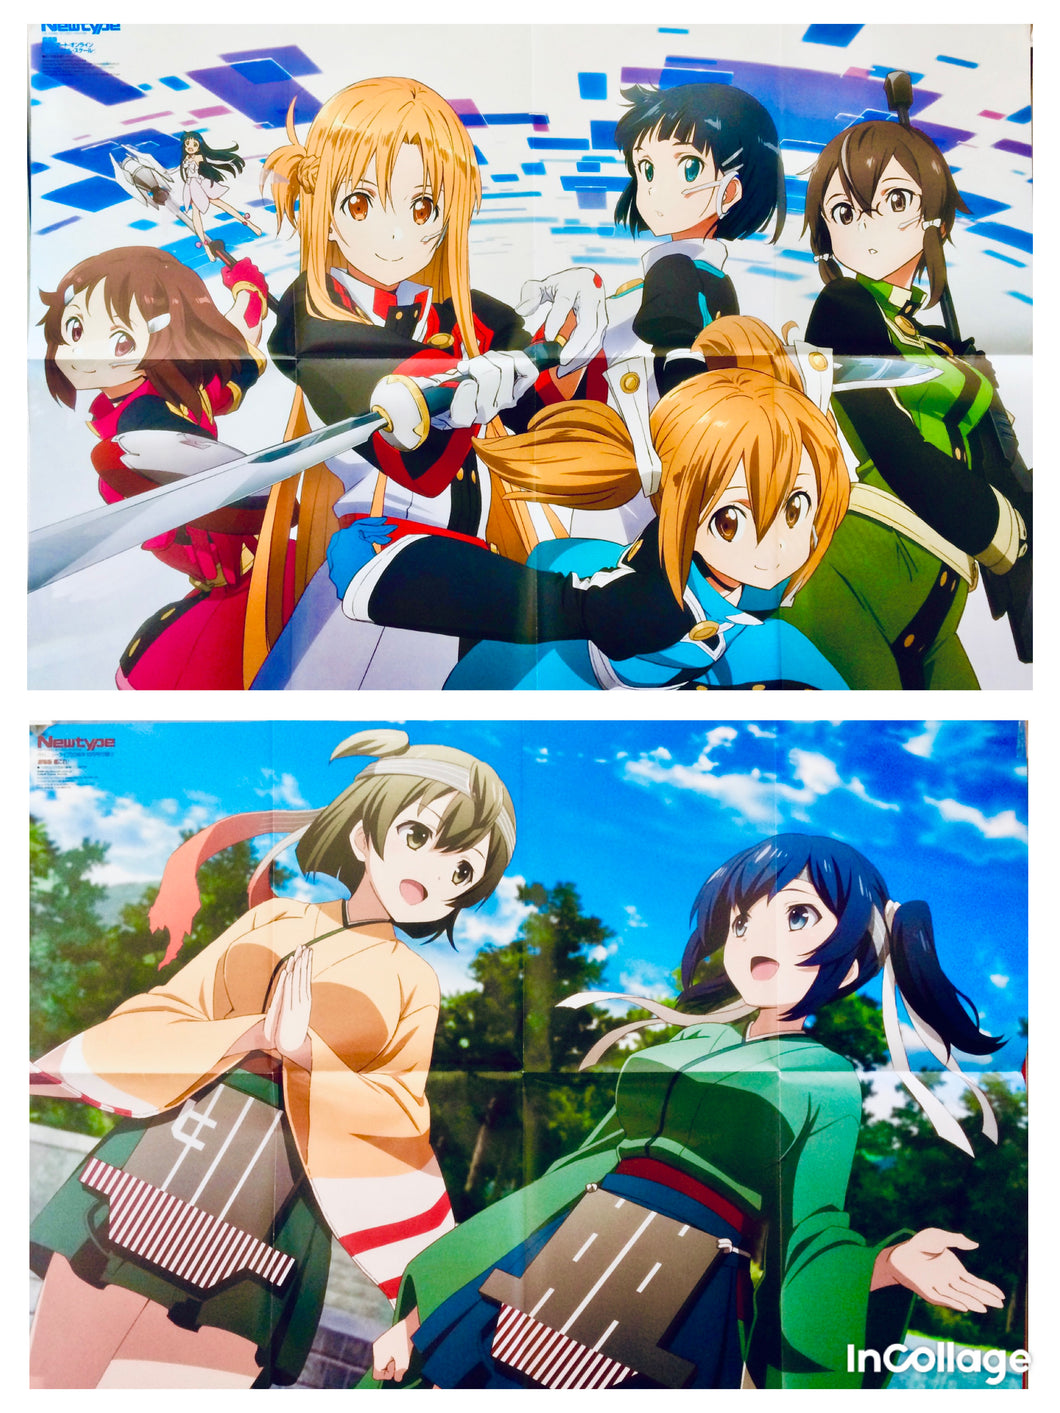 Sword Art Online / Kantai Collection ~KanColle~ - B2 Double-sided Poster - Monthly Newtype